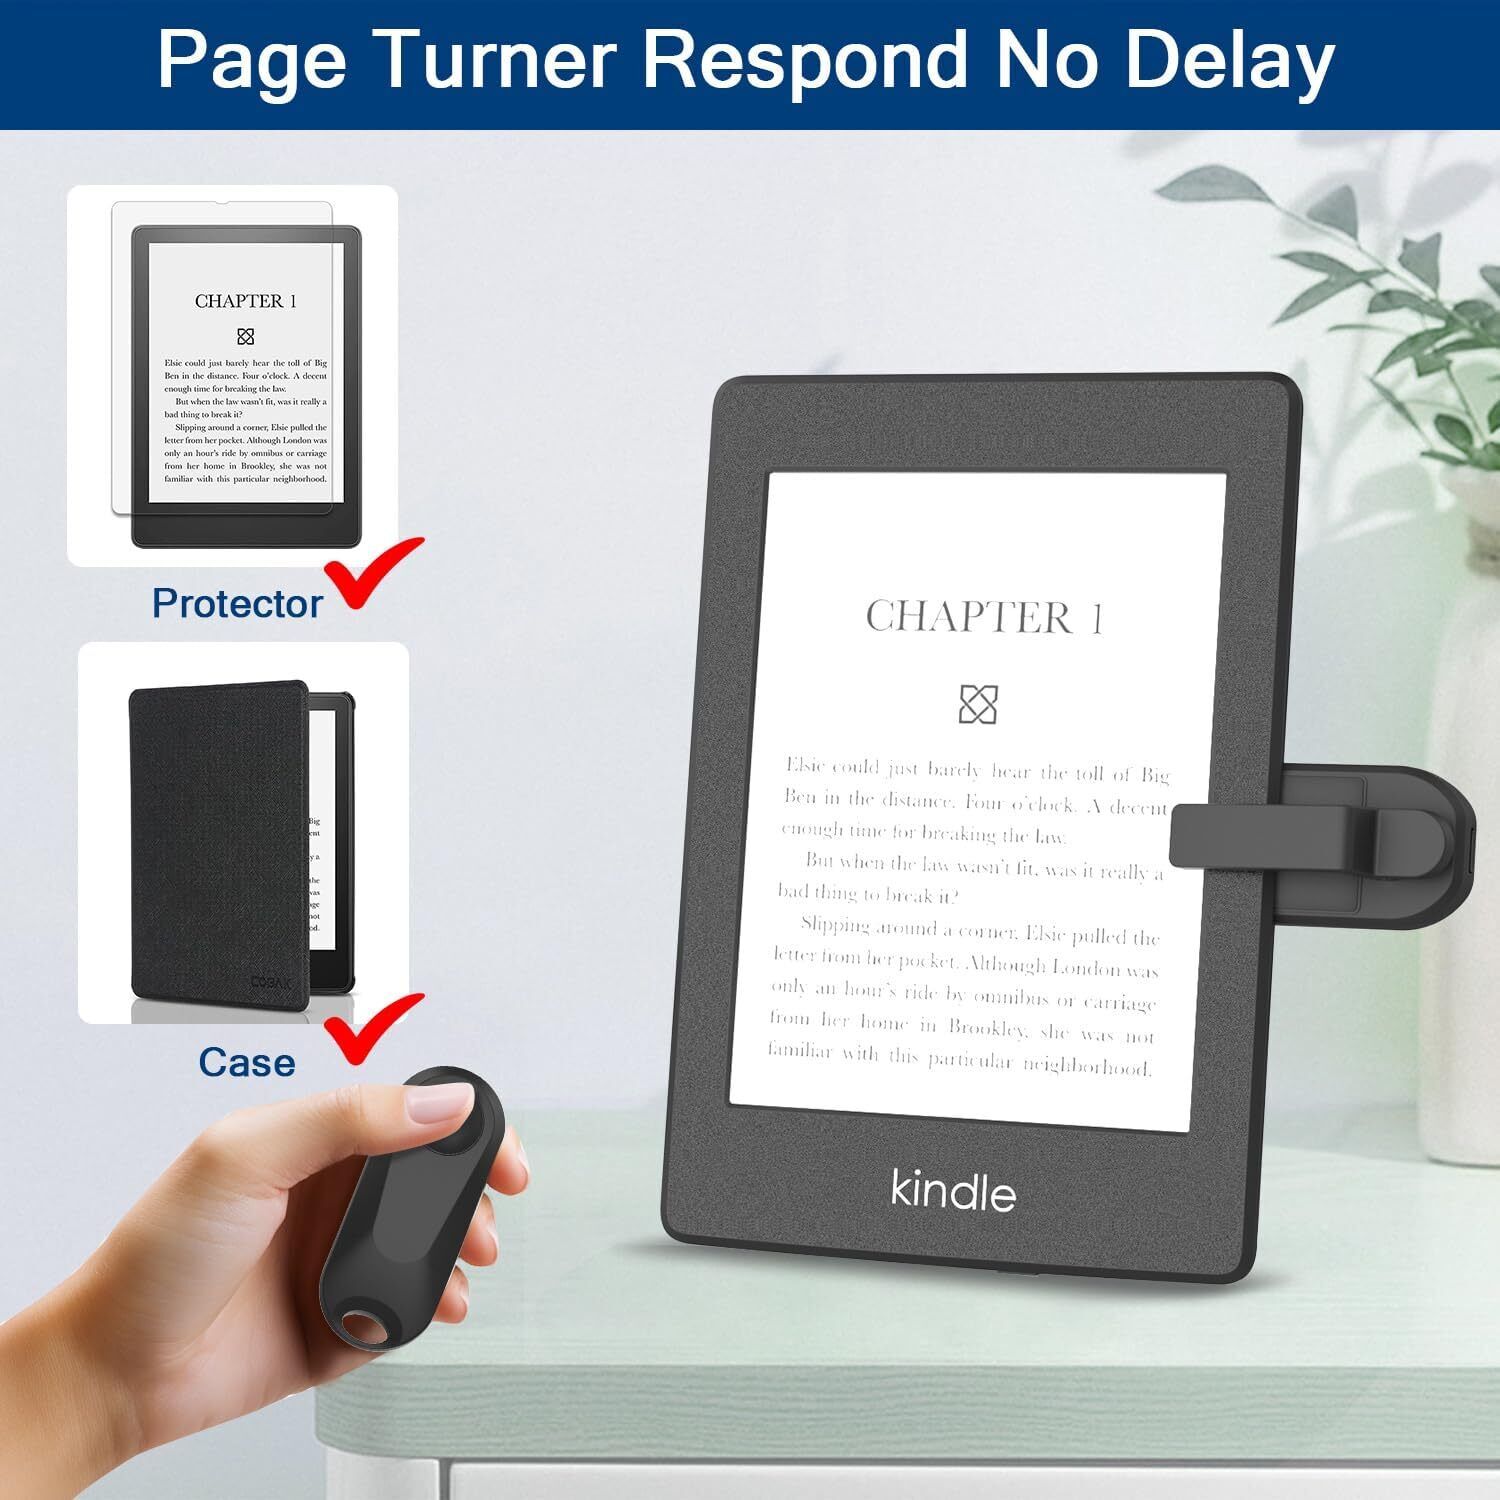 Page Turner Remote Control for Kindle, Clicker Page Turner for Paperwhite Kobo e